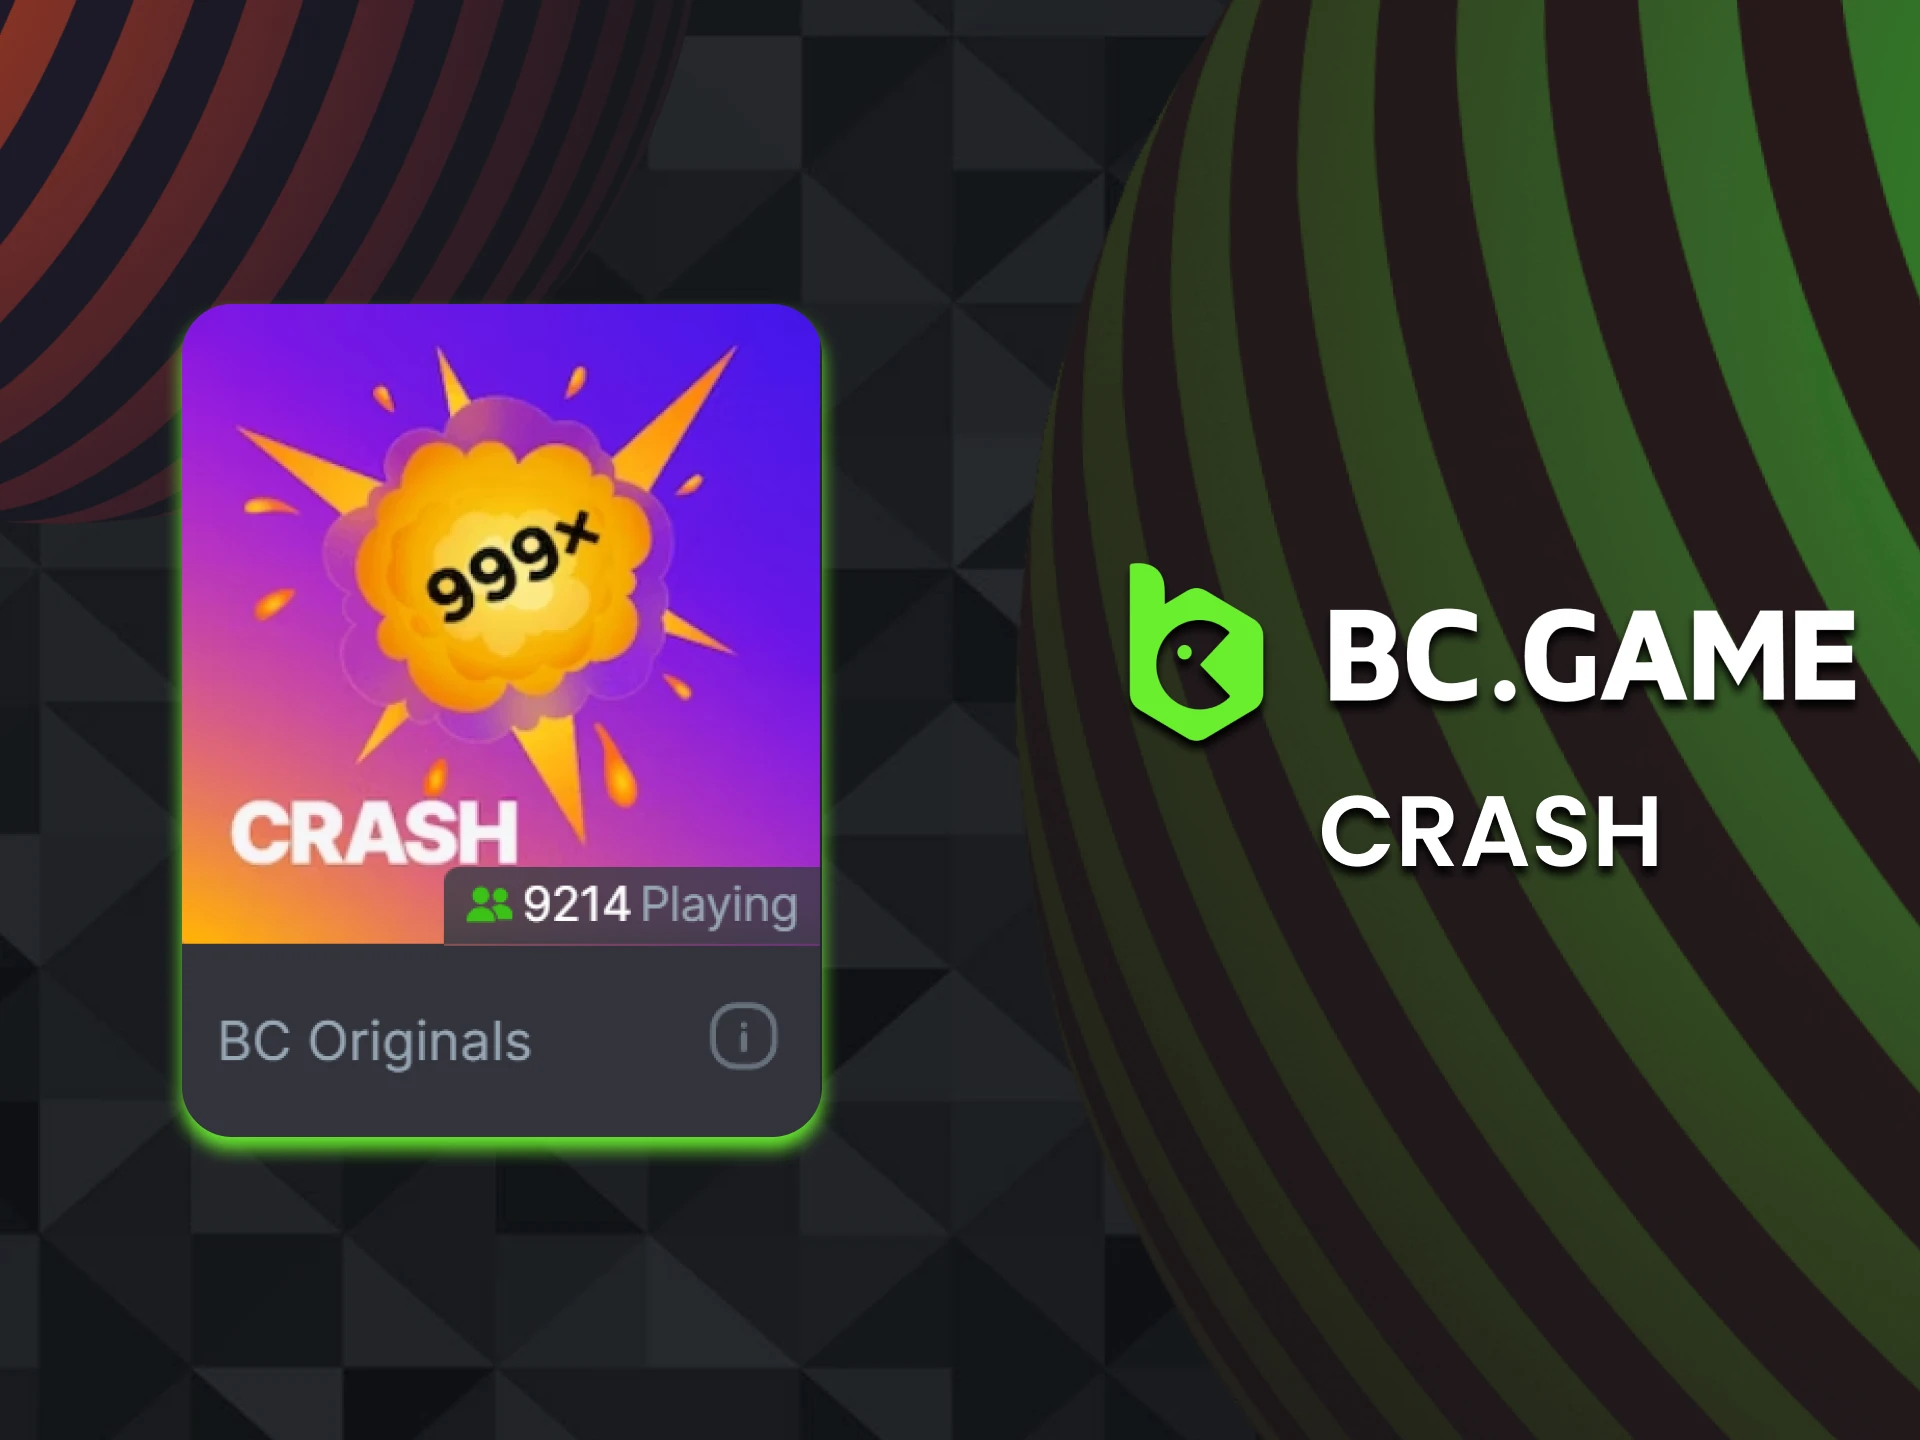 Choose the Crash casino game from BCGame.